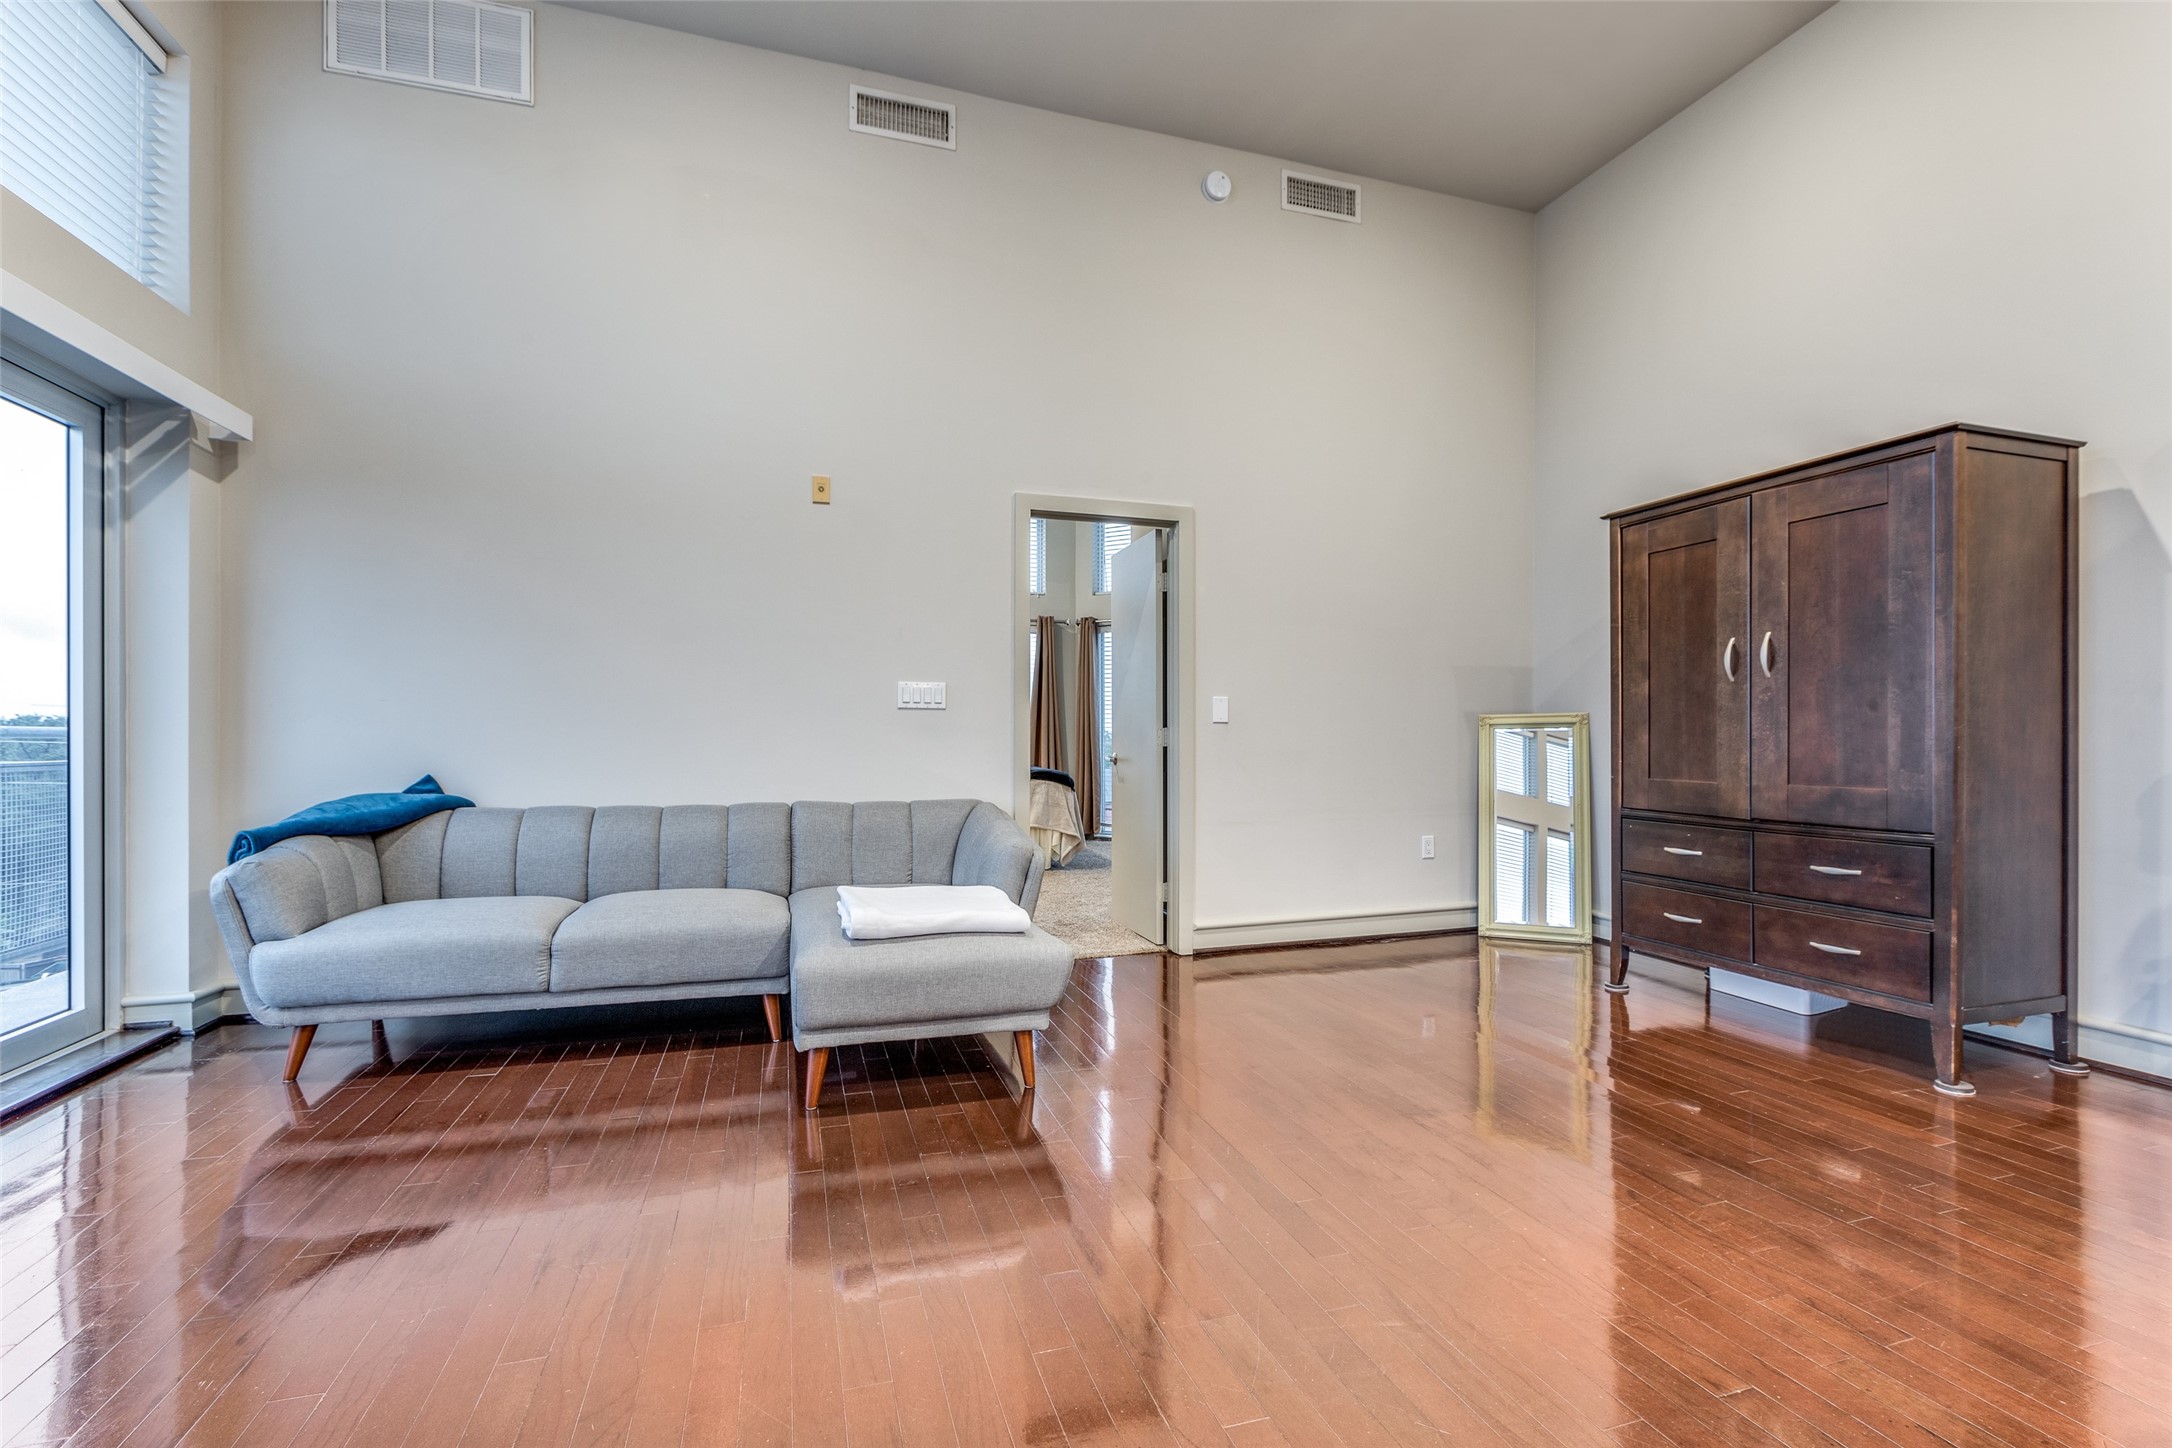 A retreat where the interplay of hardwood floors, natural light, and space creates an environment that is both aesthetically pleasing and functionally comfortable.